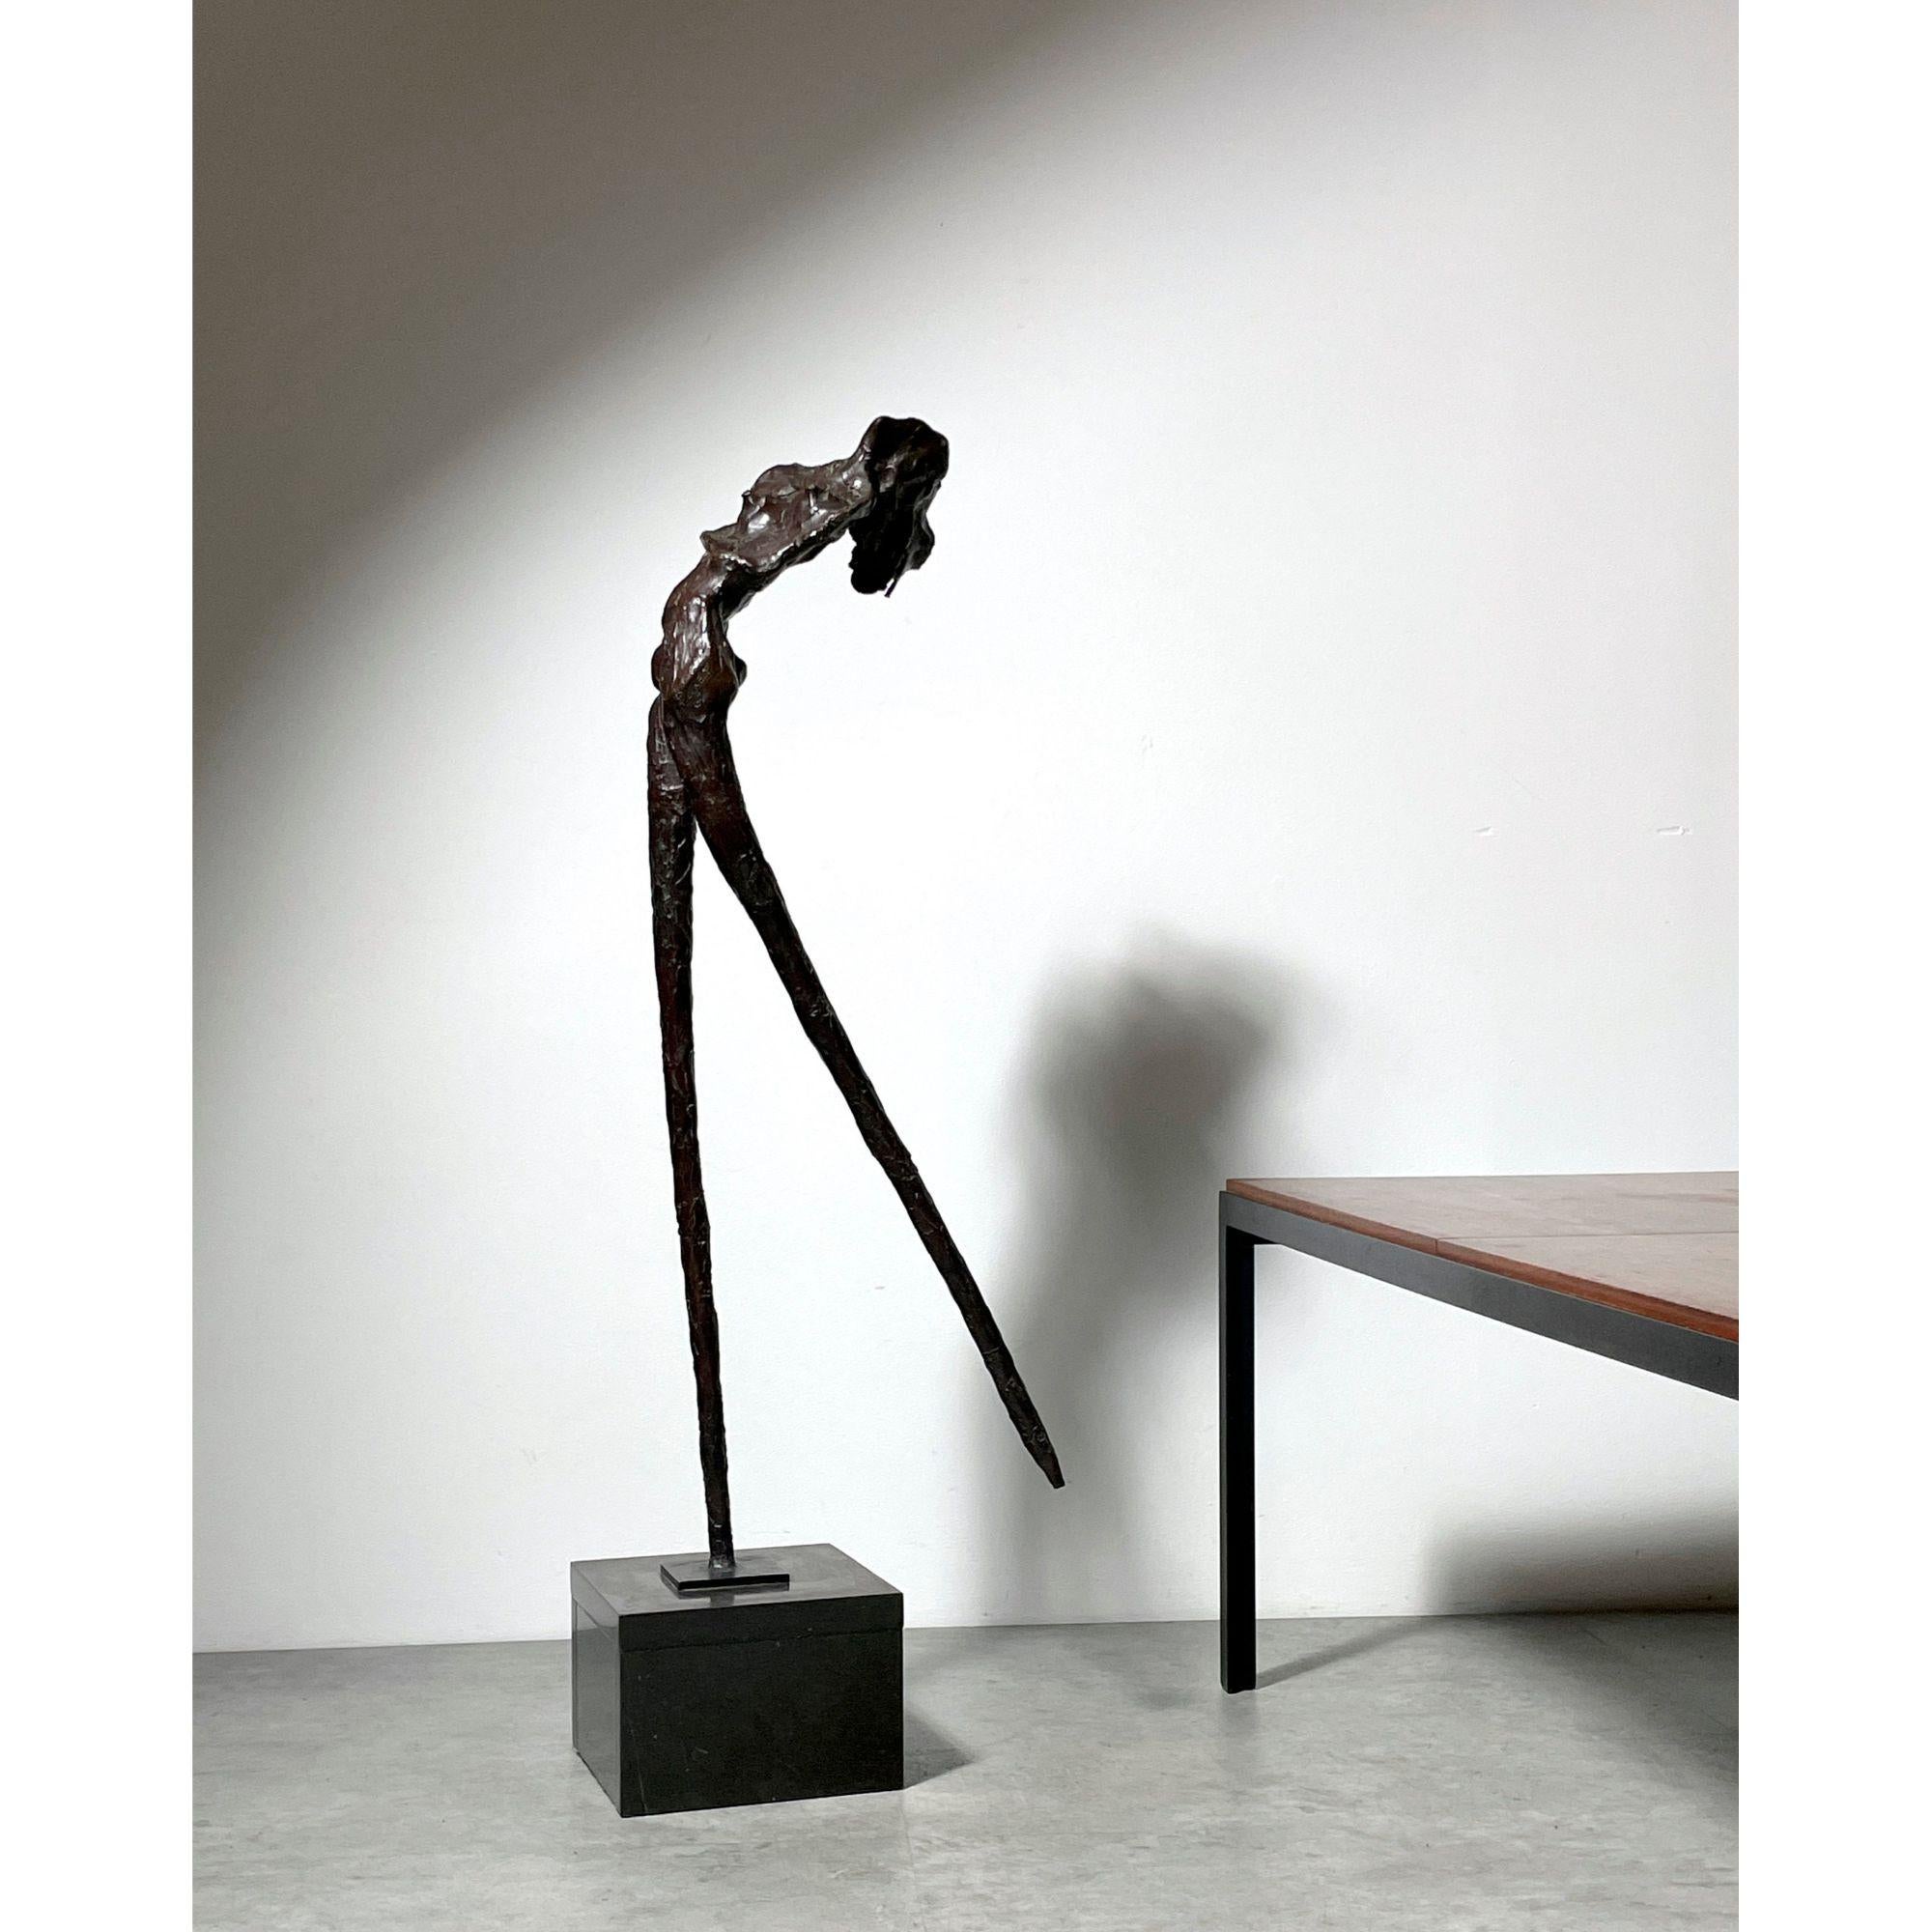 Tall Abstract Bronze Figurative Sculpture 

Incredible brutalist sculpture by Sanford (Sandy) Decker 1967
Abstract nude female in bronze mounted to marble base
Style influenced by Alberto Giacometti
Incised signature and date

Additional